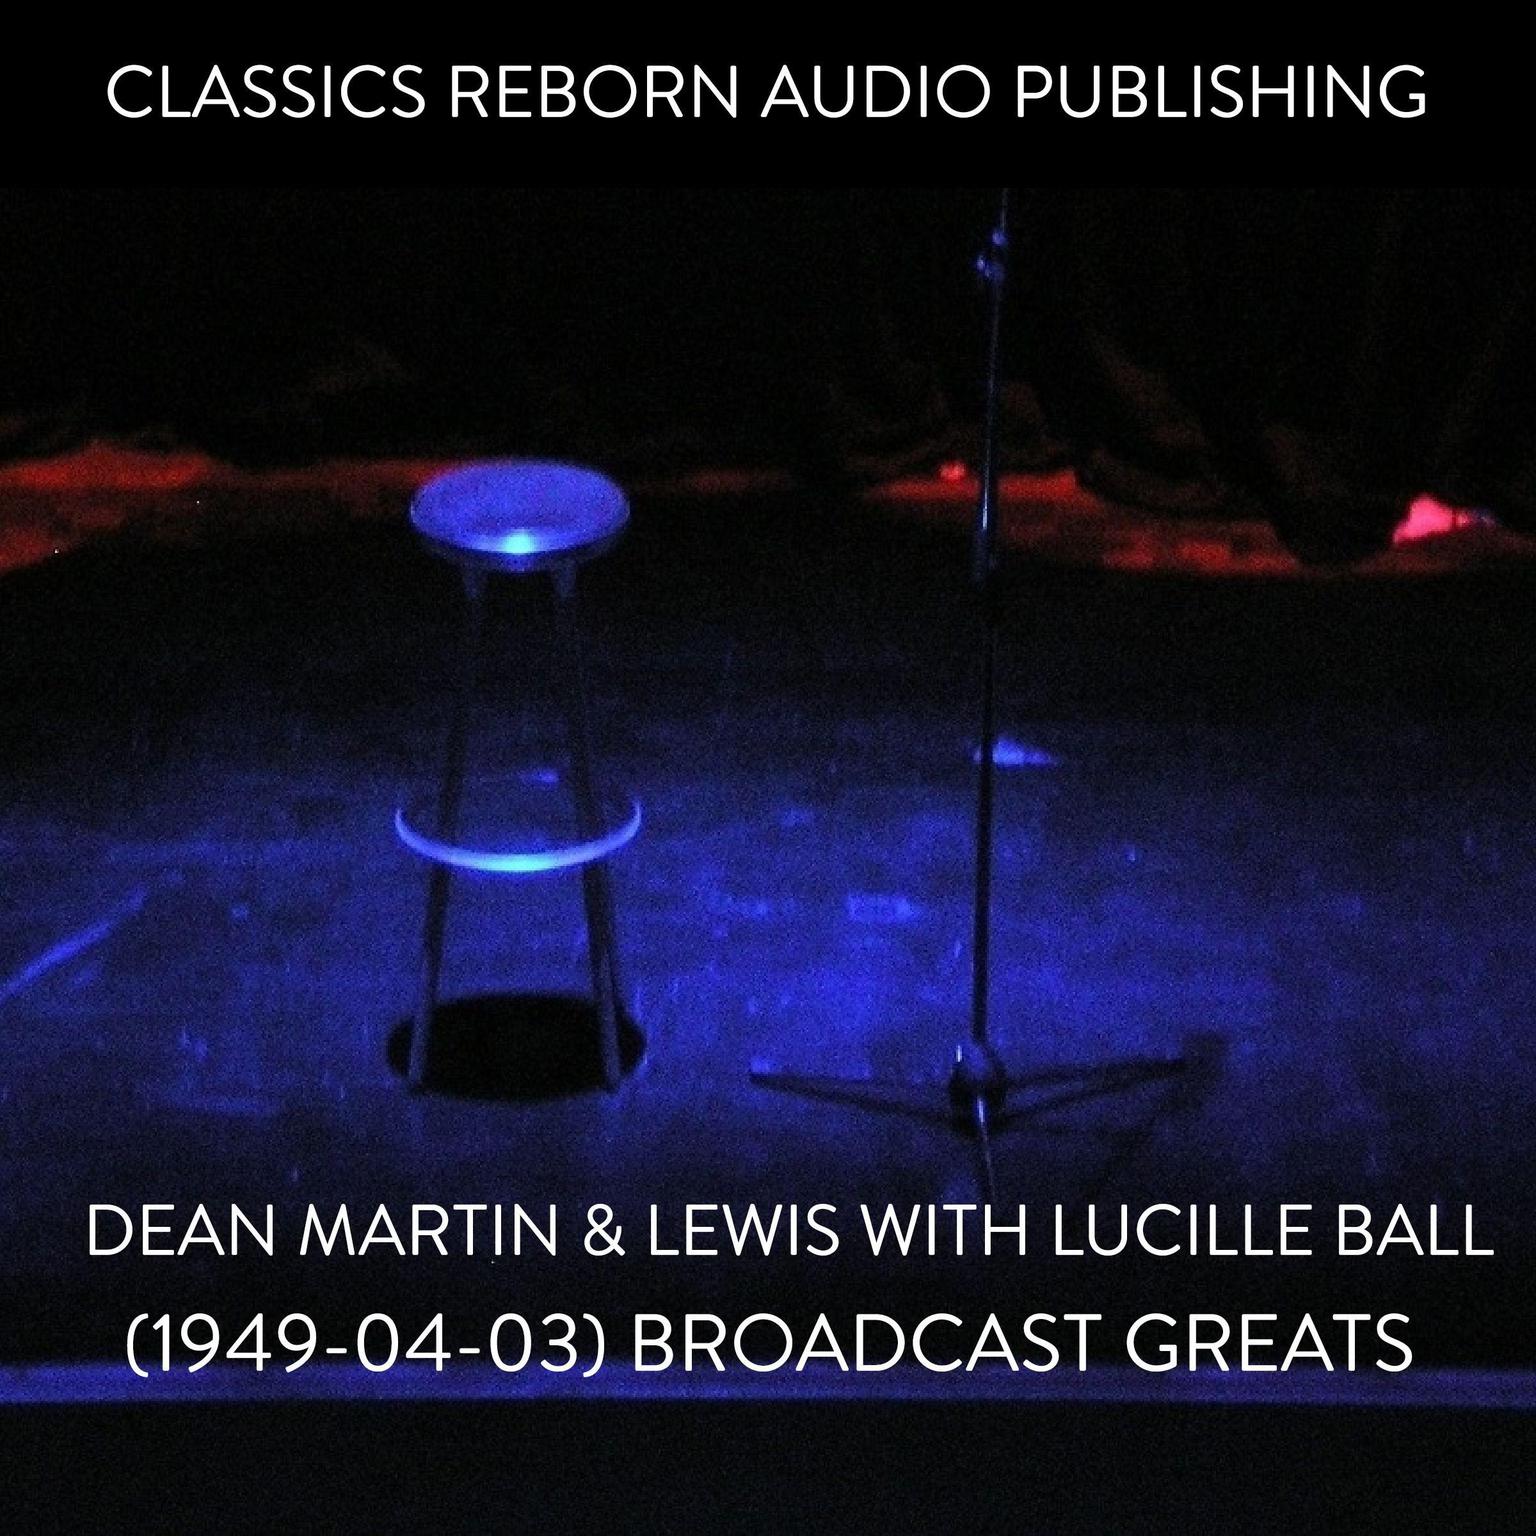 Dean Martin & Lewis with Lucille Ball (1949-04-03) Broadcast Greats Audiobook, by Classics Reborn Audio Publishing